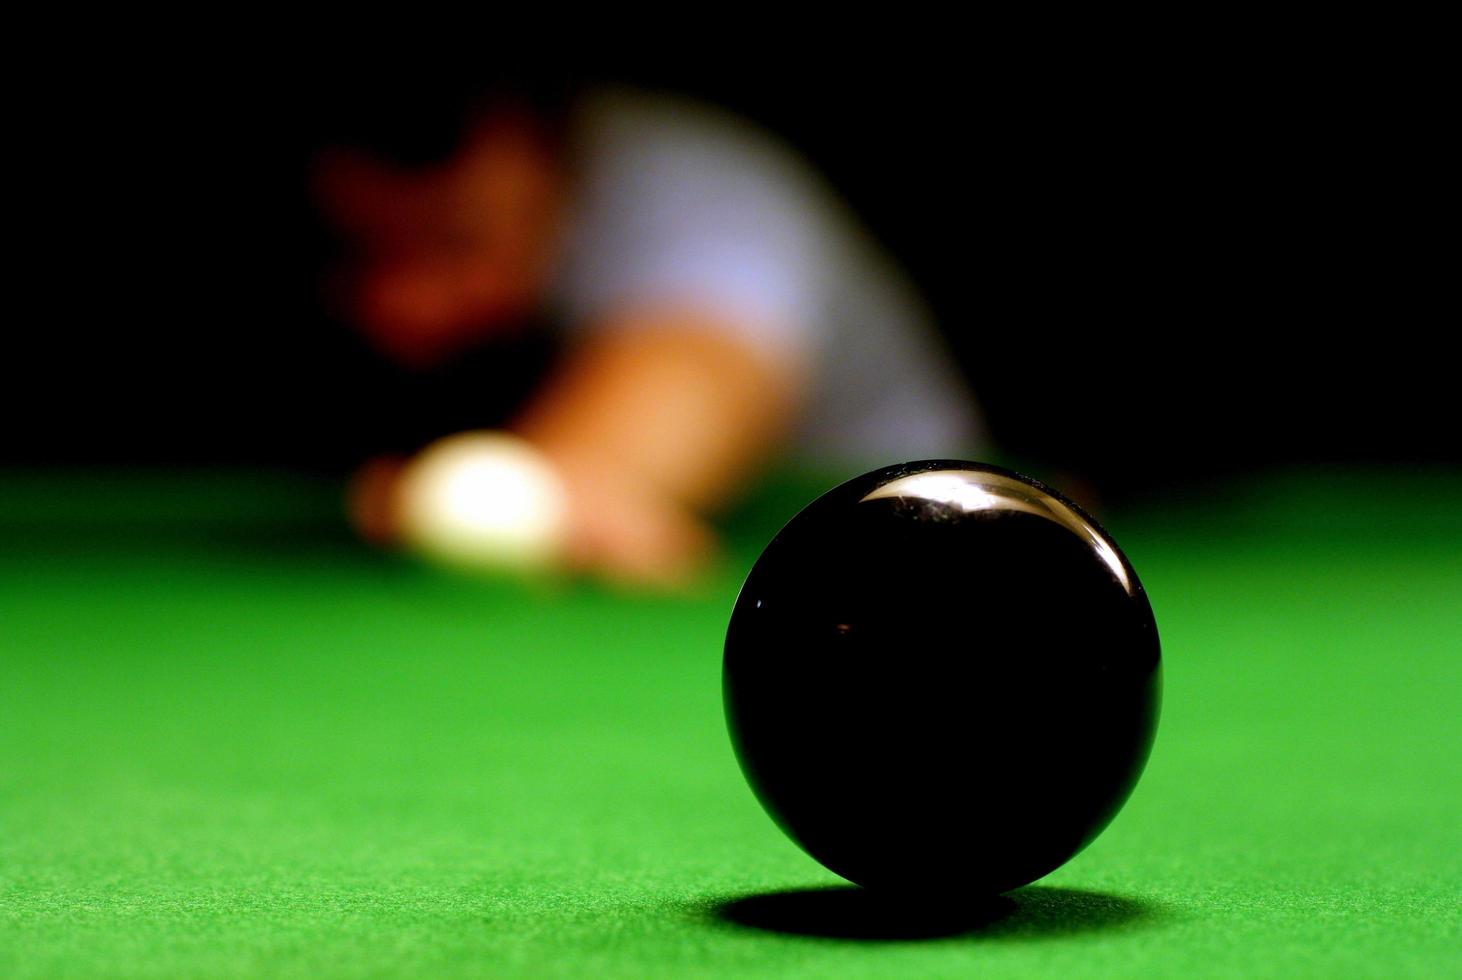 Black ball on a snooker table photo